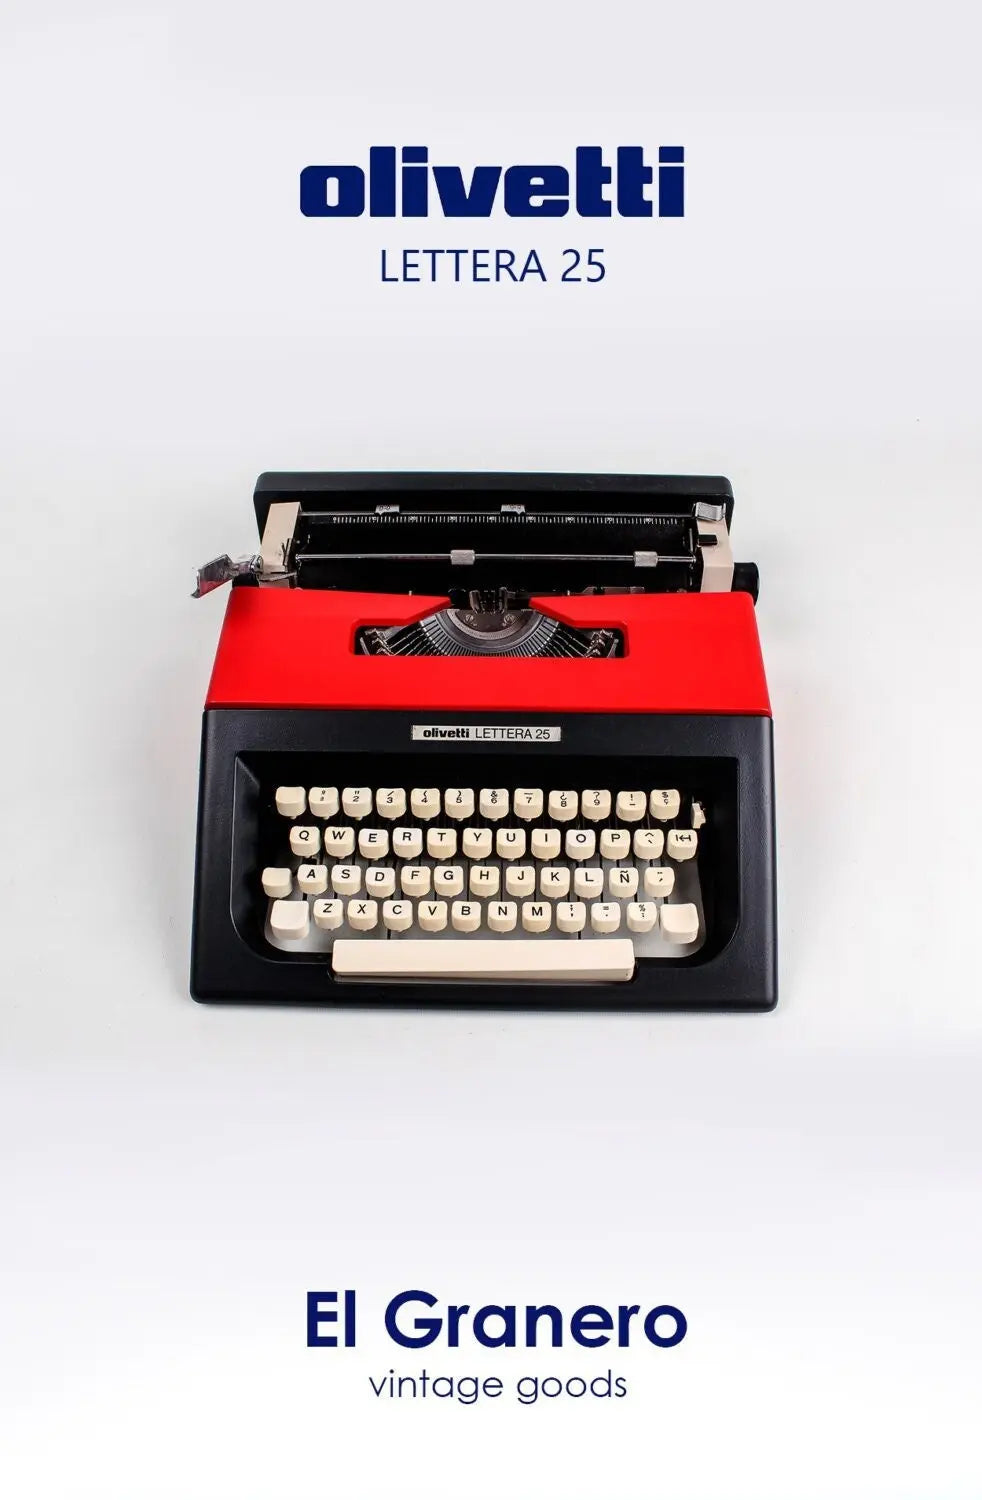 Olivetti Lettera 25 Red & Black Typewriter, Vintage, Mint Condition, Manual Portable, Professionally Serviced by Typewriter.Company - ElGranero Typewriter.Company